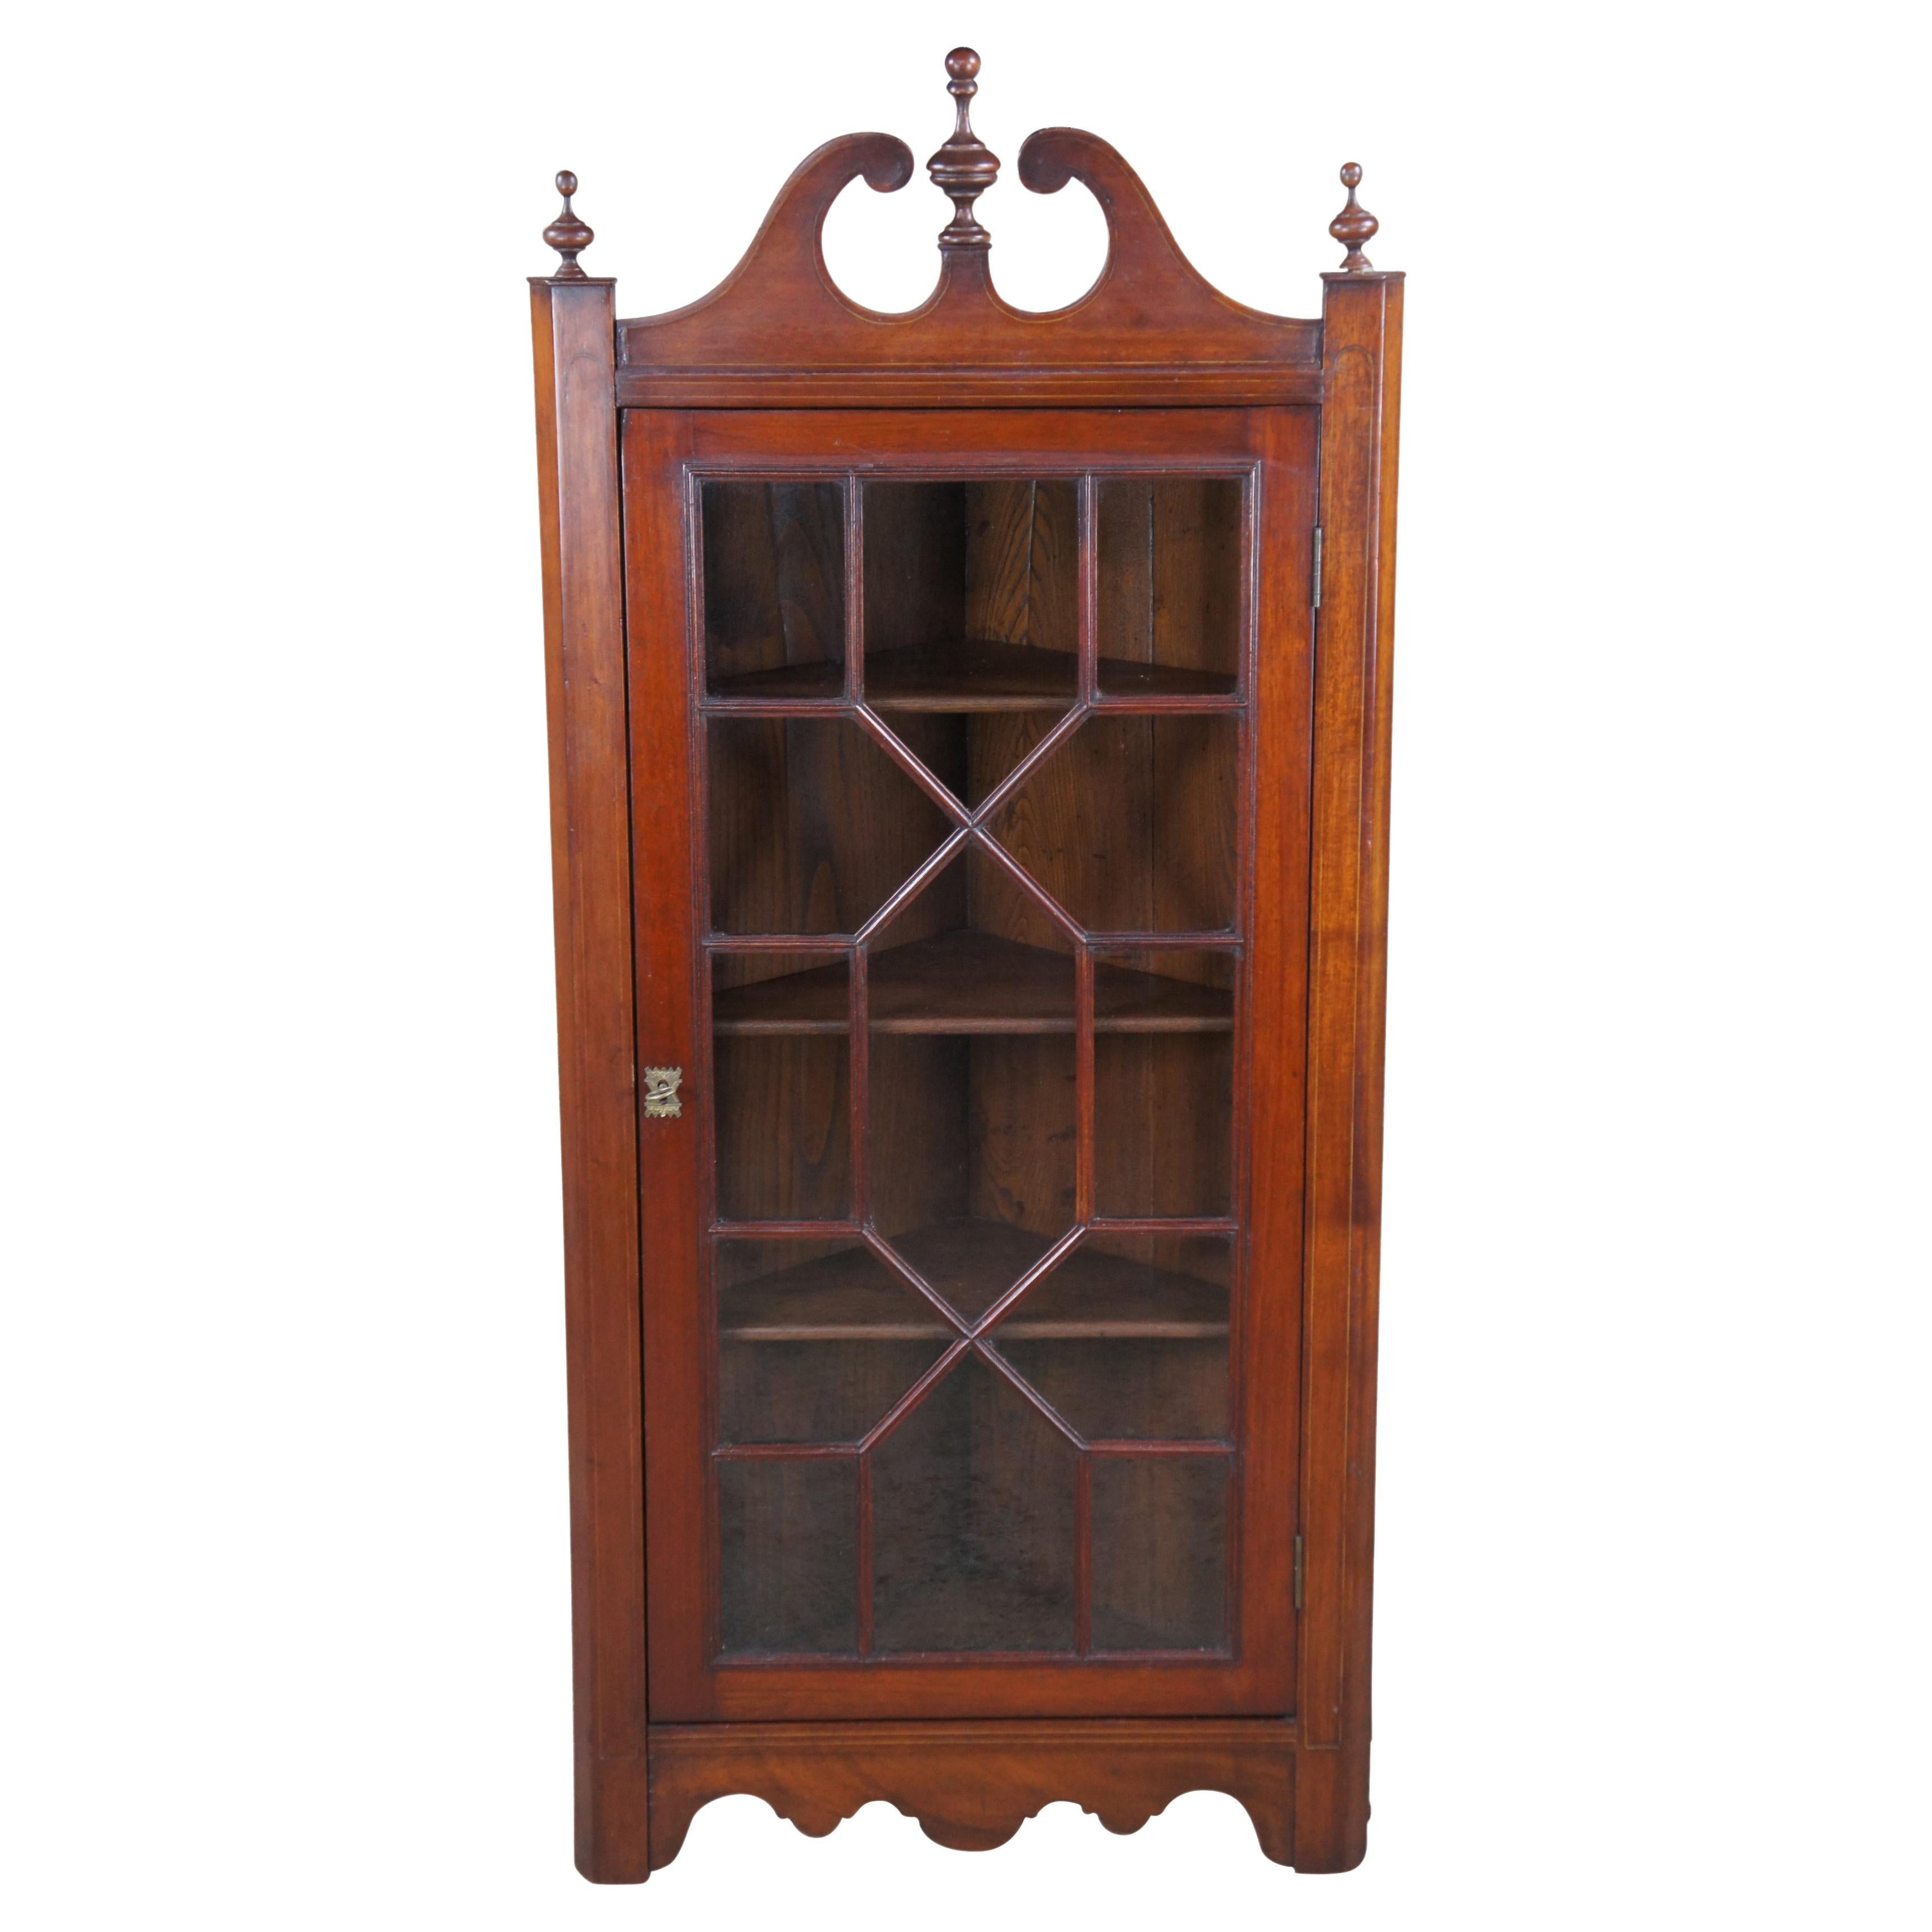 Antique English George III Mahogany Inlaid Wall Hanging Corner Cabinet Cupboard For Sale